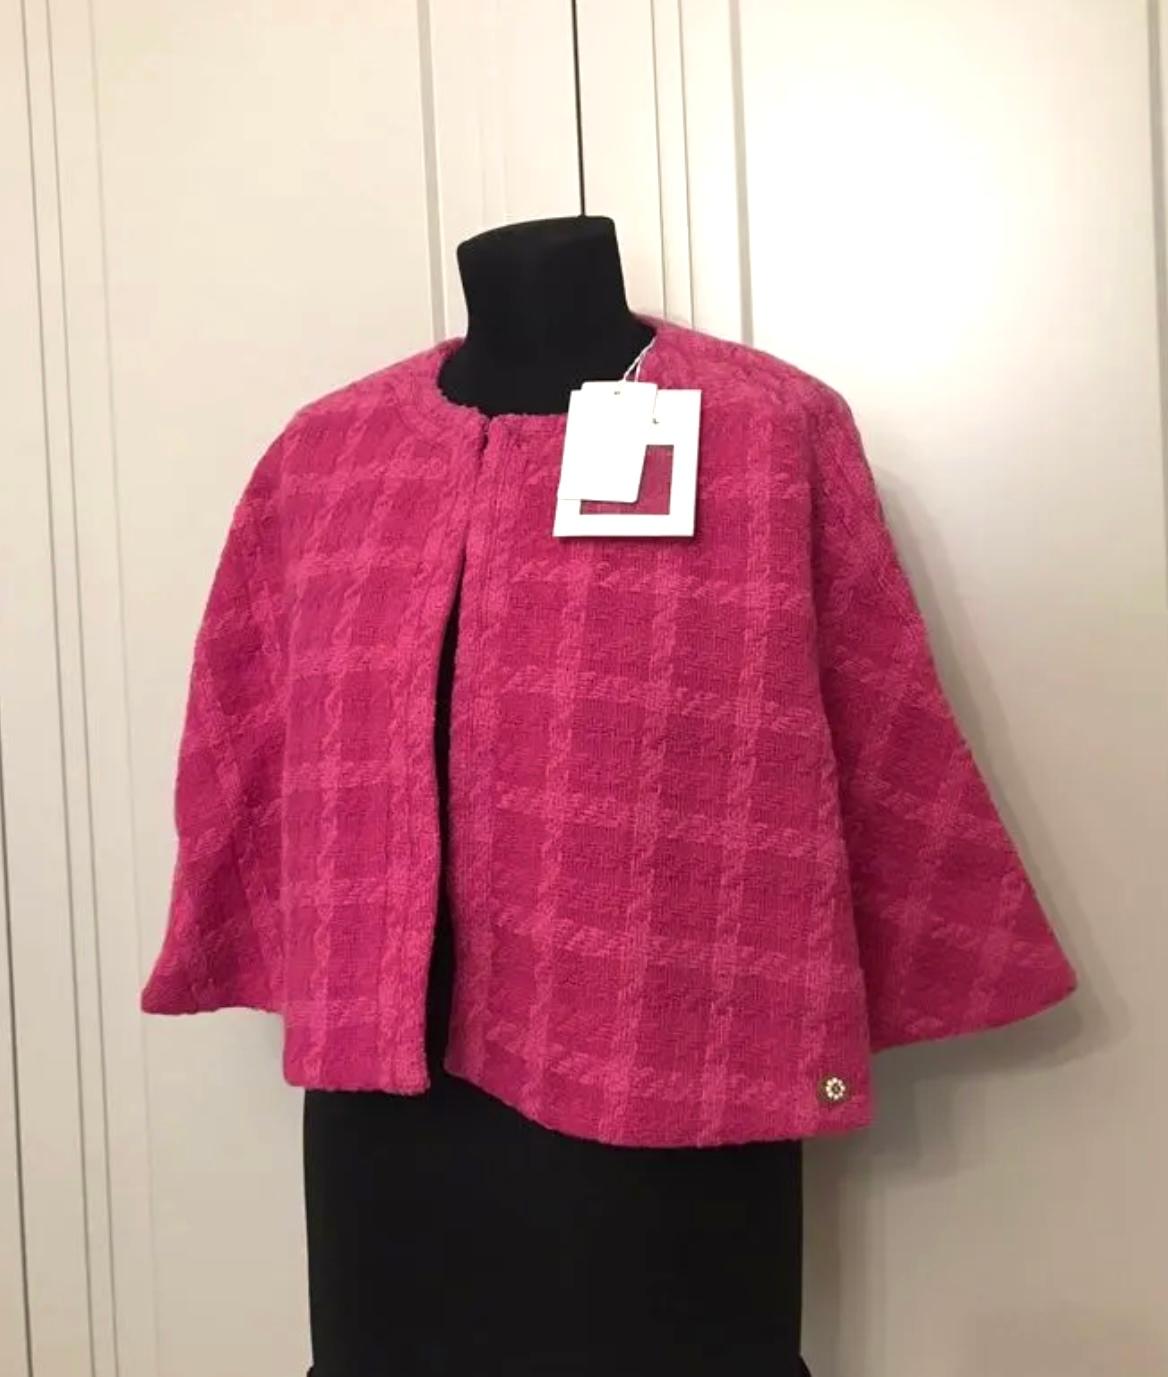 Chanel New Iconic Runway 2019 Fall Tweed Cape Jacket For Sale 7